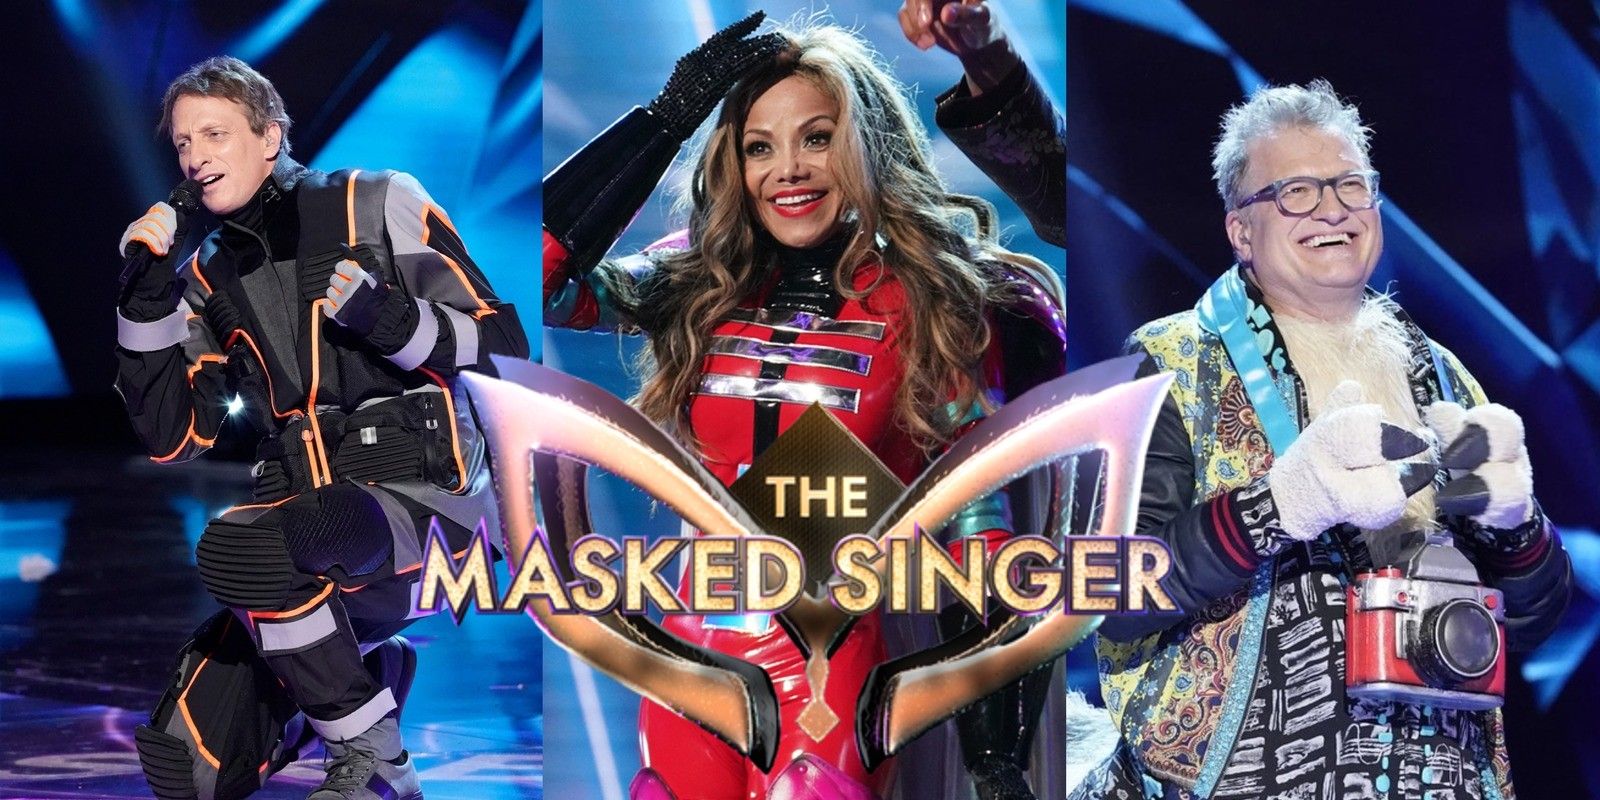 Every Athlete Who Has Competed on 'the Masked Singer